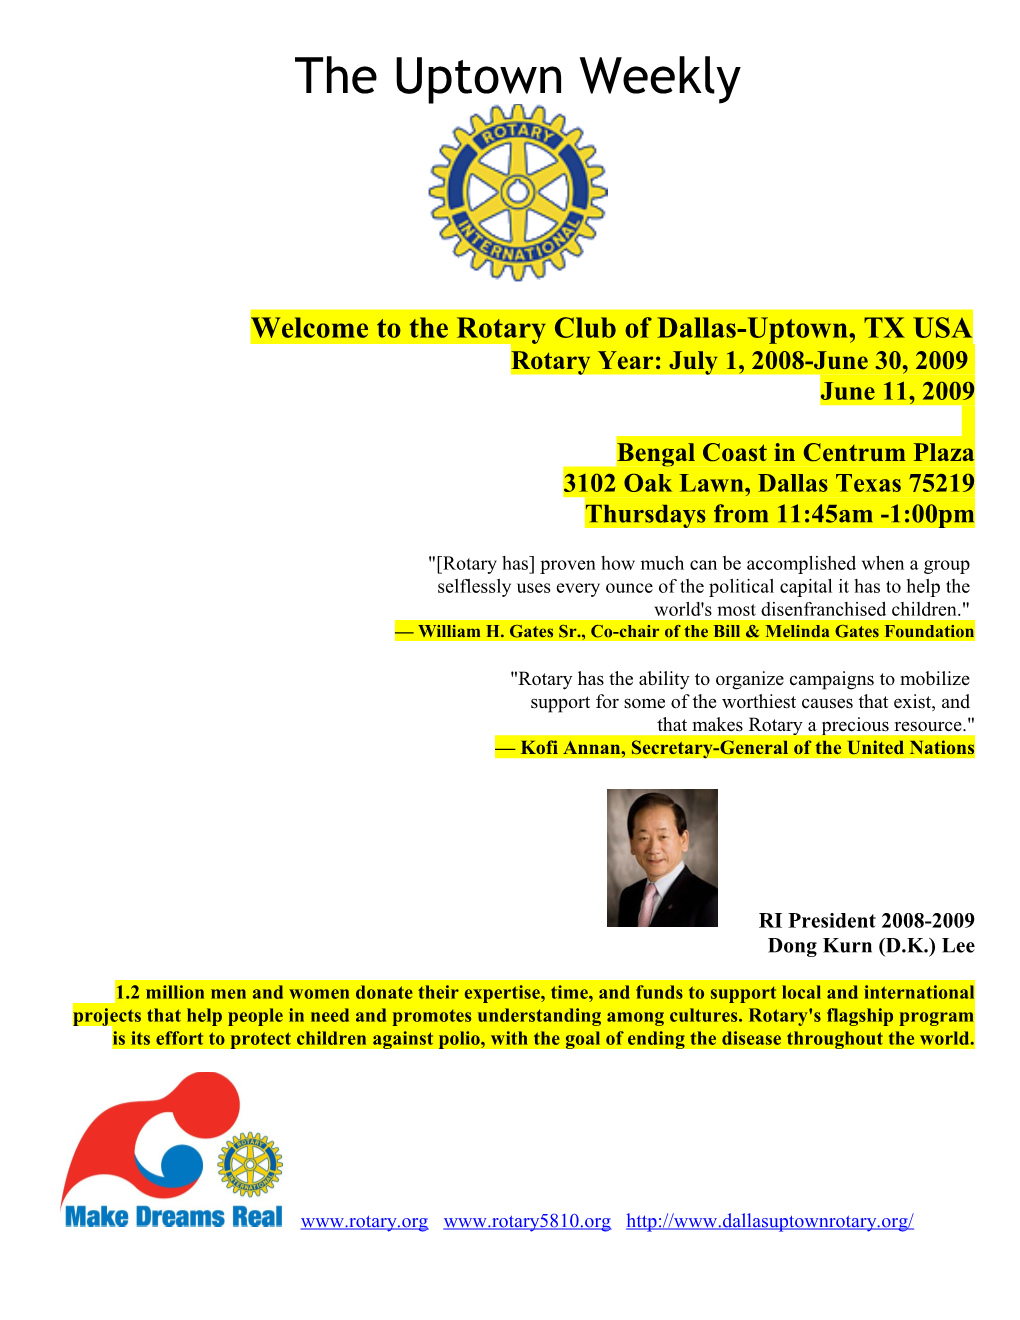 Welcome to the Rotary Club of Dallas-Uptown, TX USA s2